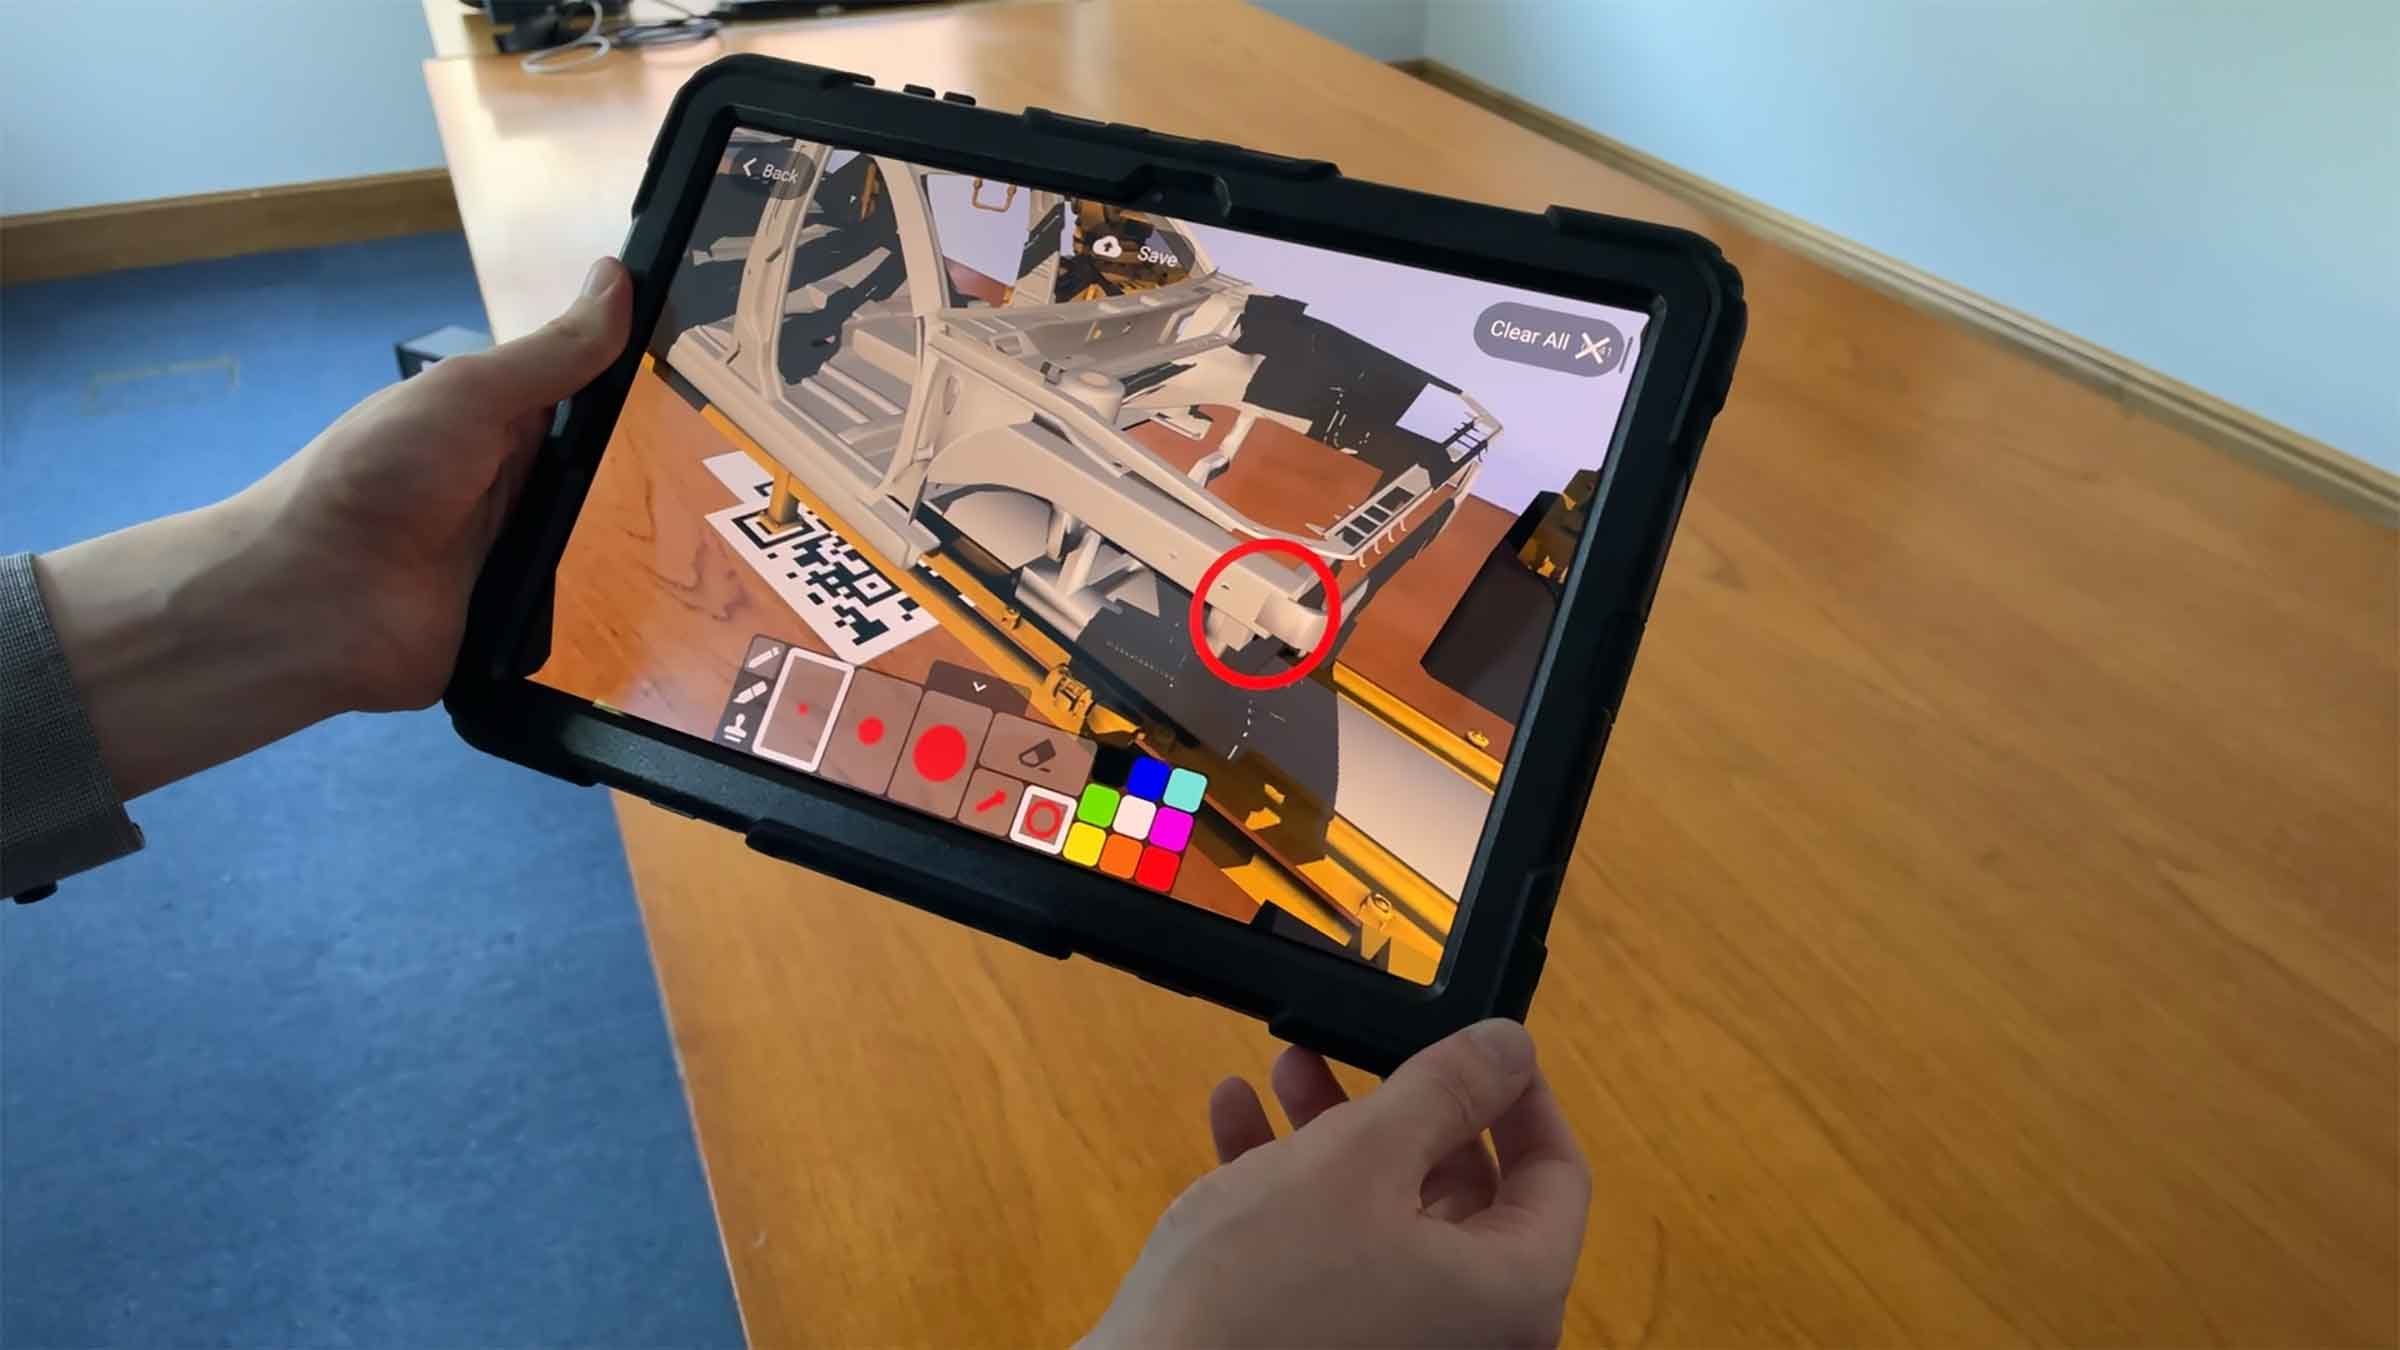 An image of AEC data being visualized on a tablet in Augmented Reality using the Theorem-AR app.